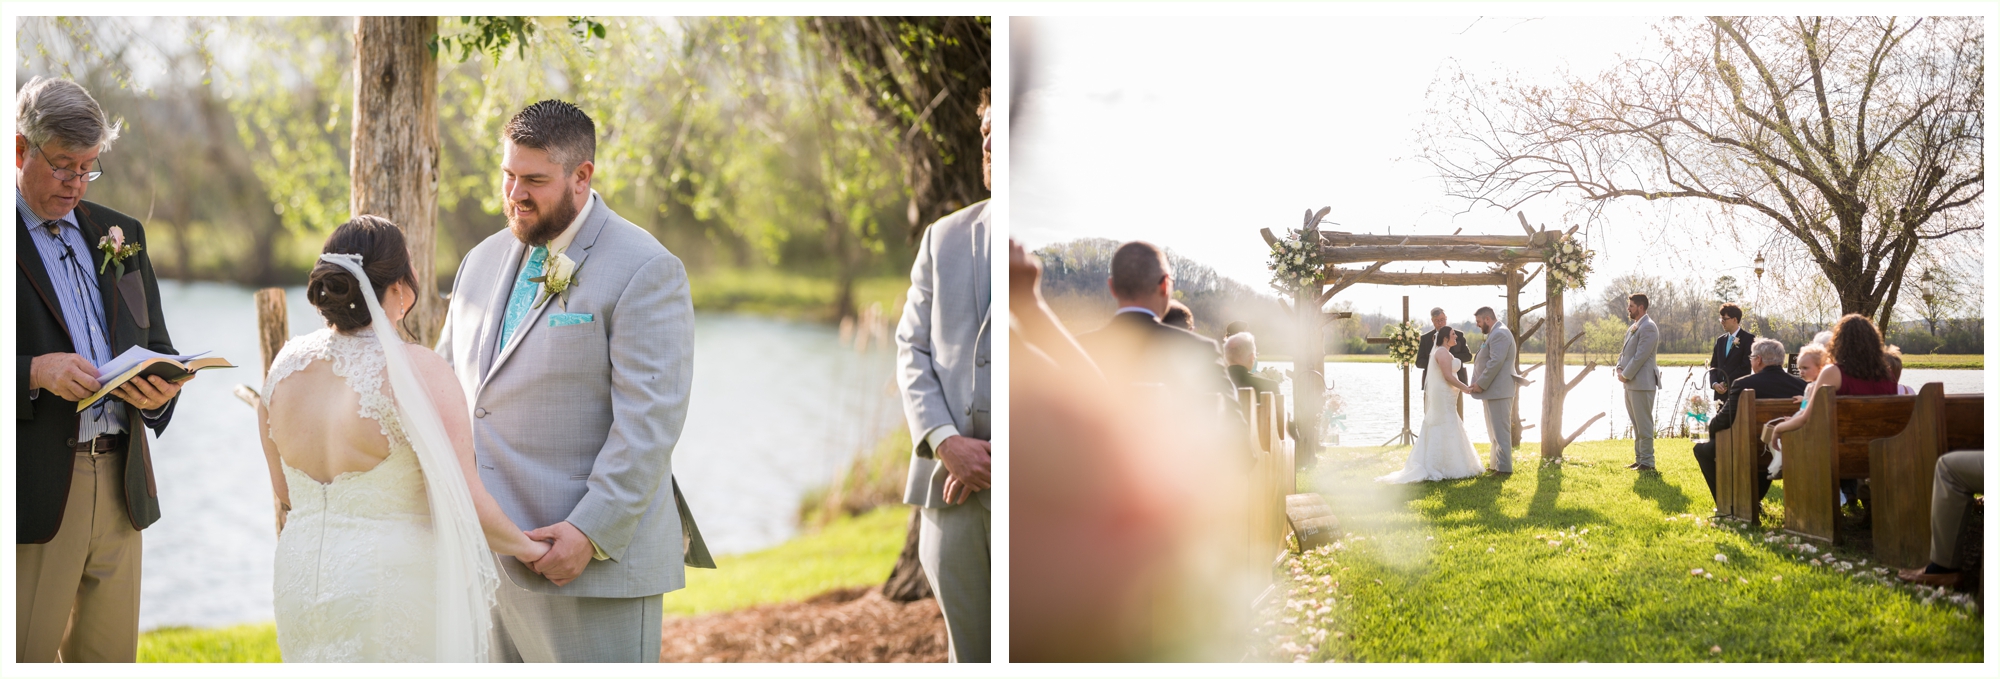 wedding ceremony photos at spring lake events